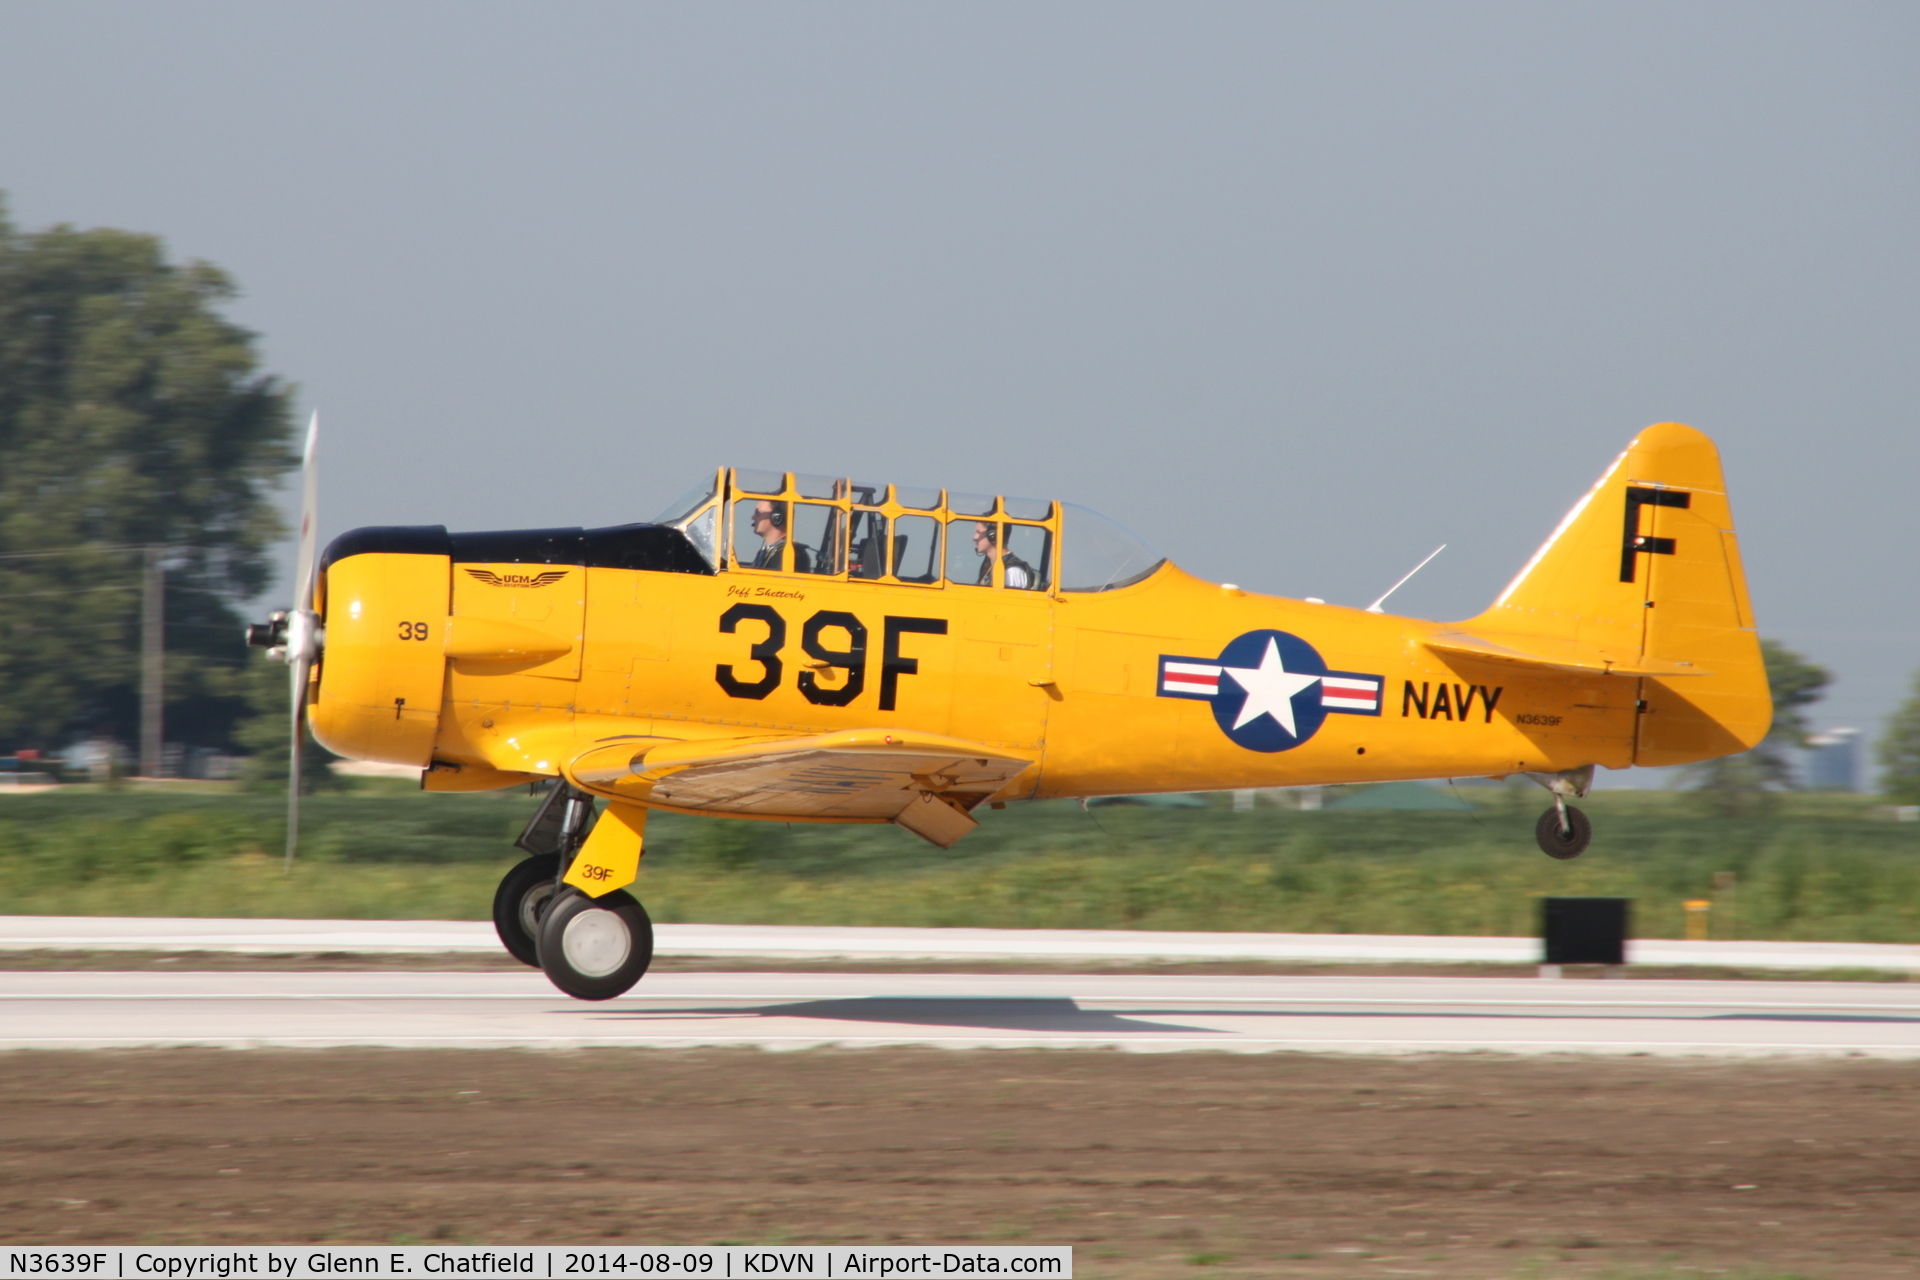 N3639F, North American SNJ-6 Texan C/N 121-43111, At the Quad Cities Air Show